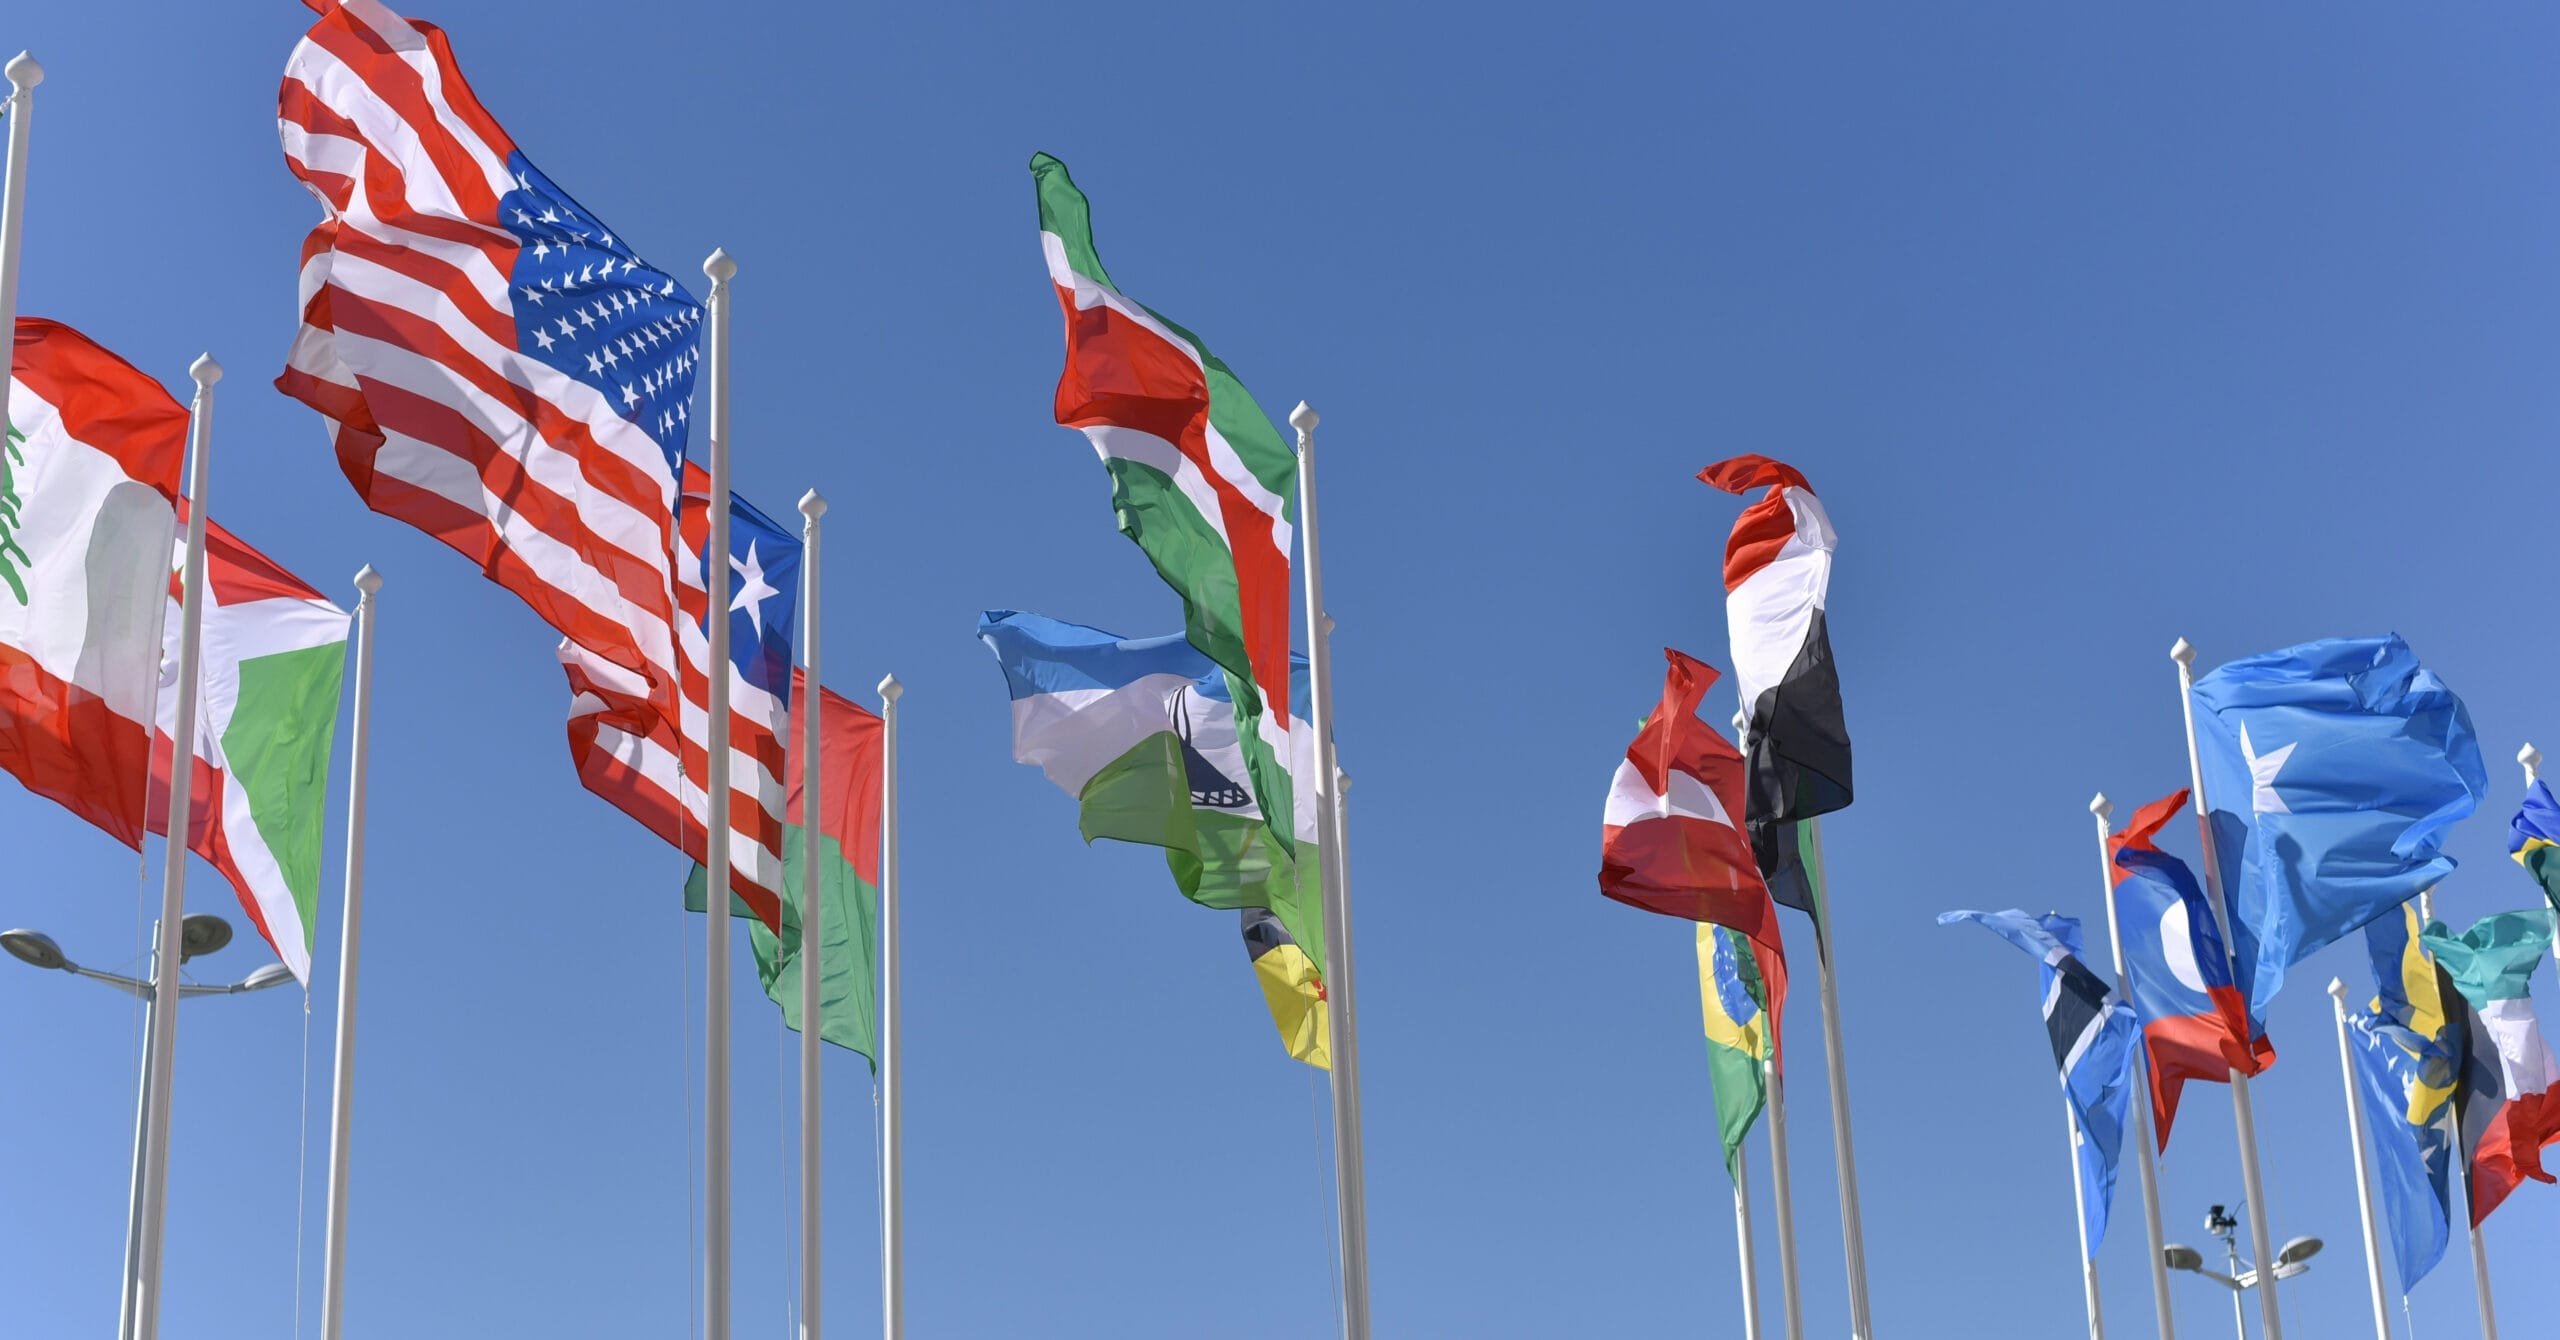 Flags from countries around the world in front of a blue sky background